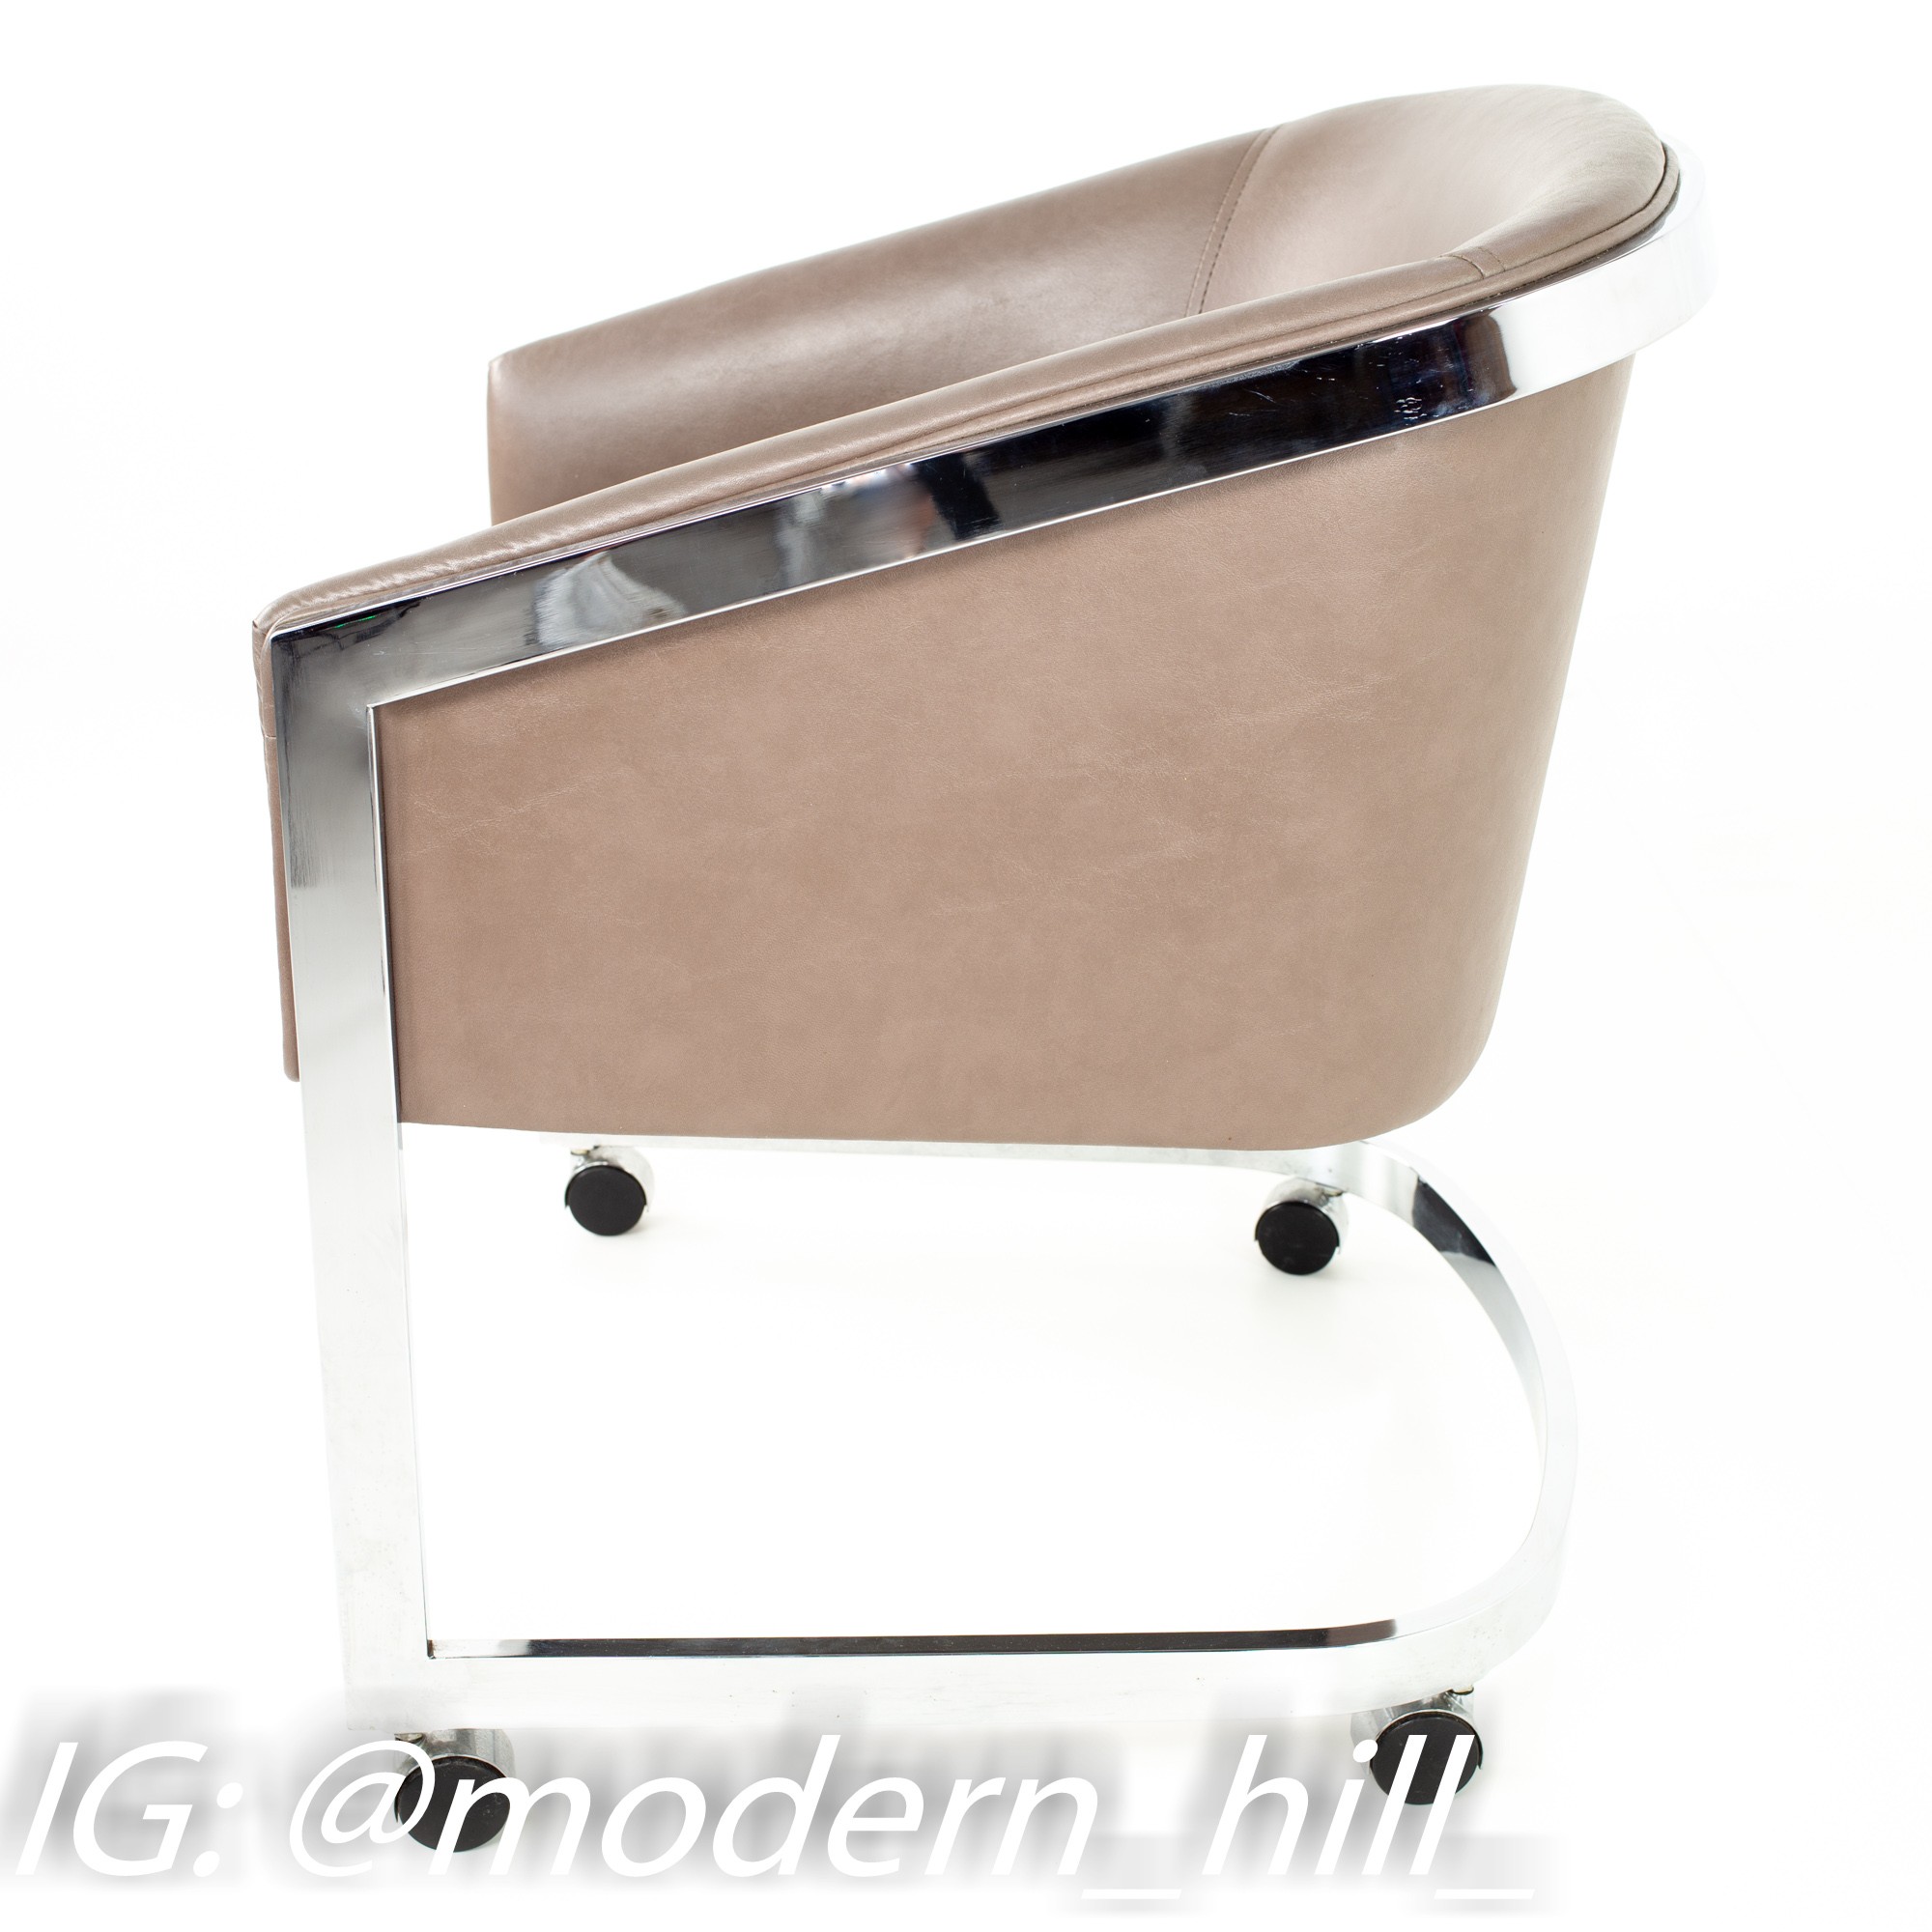 Milo Baughman for Design Institute of America Mid Century Modern Chrome Side Lounge Club Chairs with Casters - Set of 4